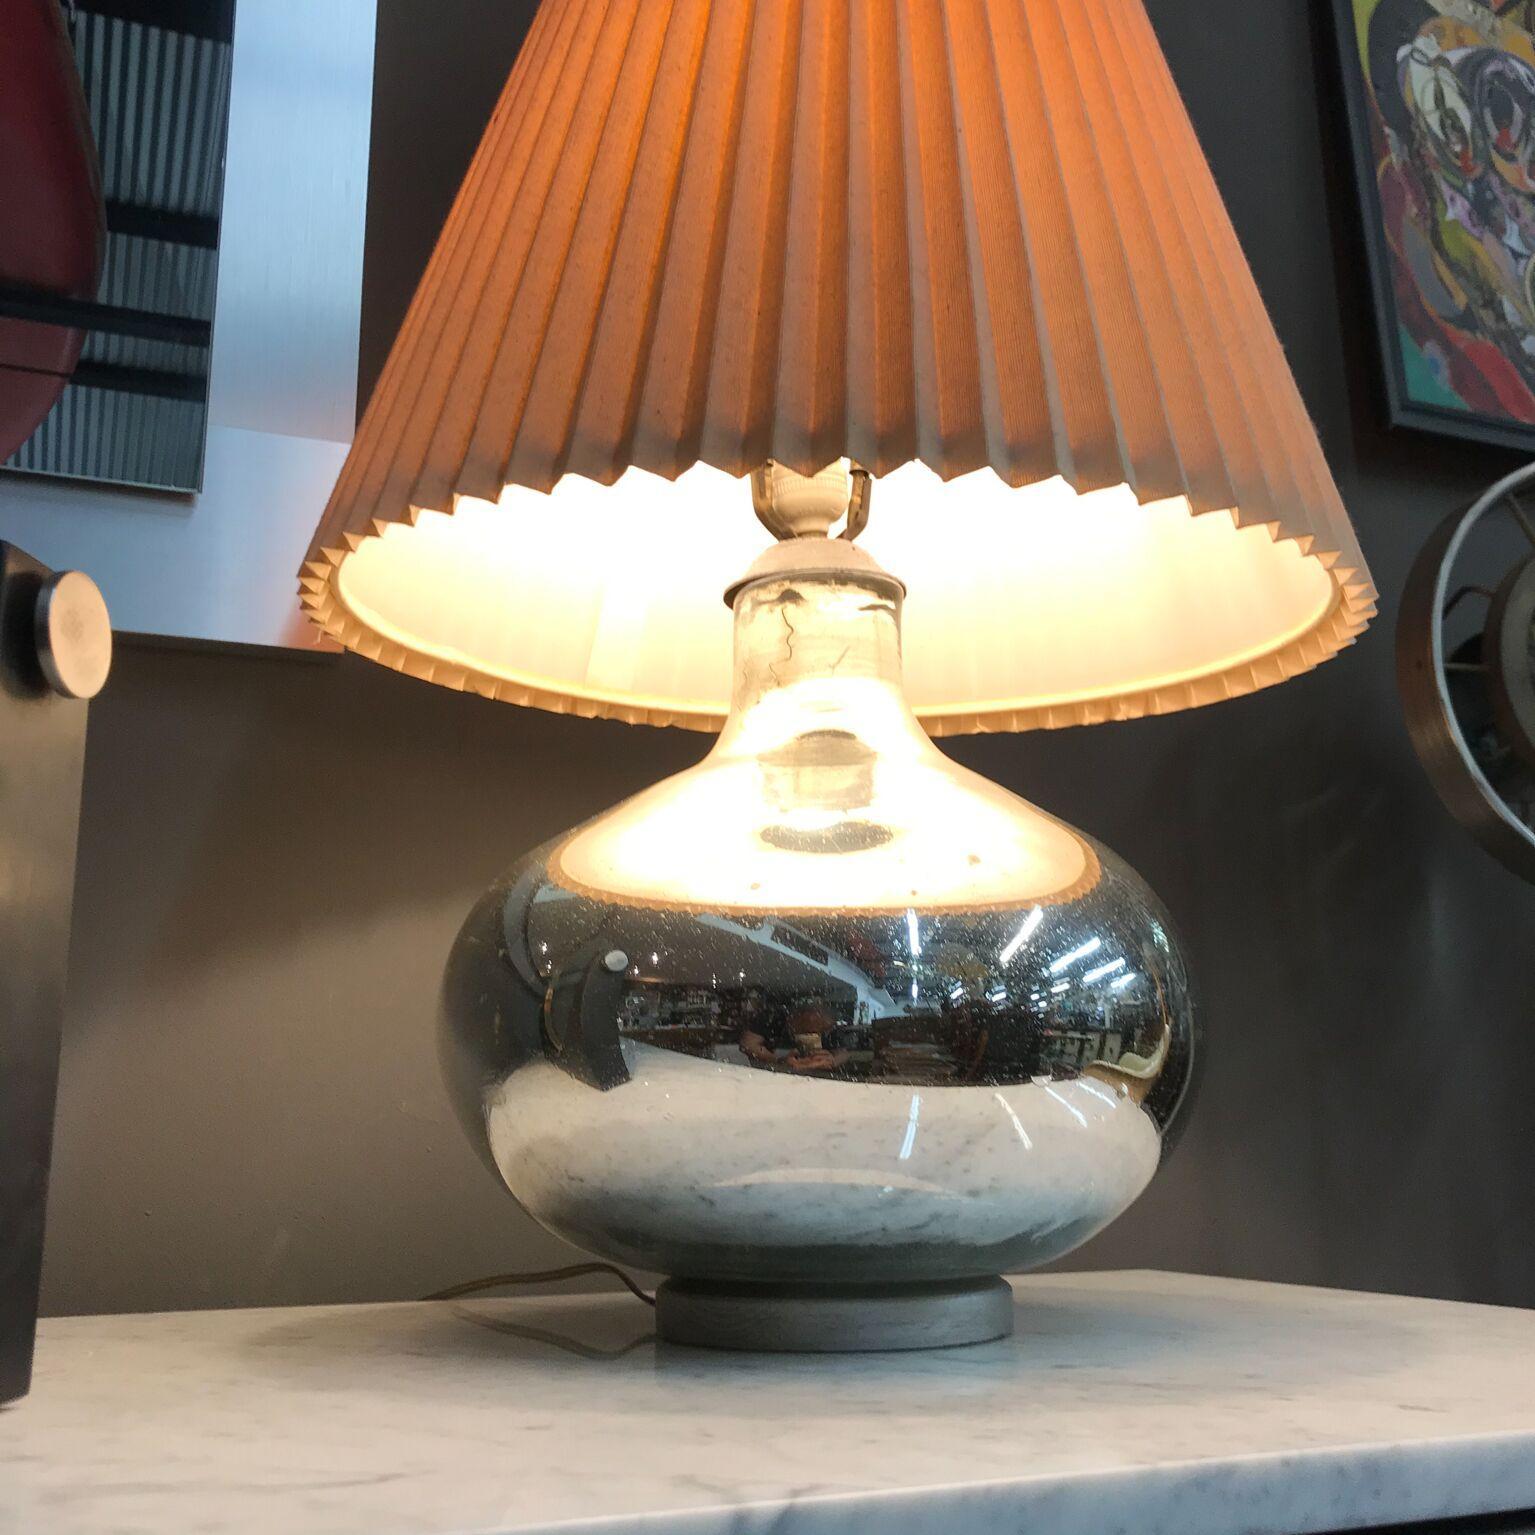 1950s Modern Mercury Glass Table Lamp Mexico City  In Good Condition For Sale In Chula Vista, CA